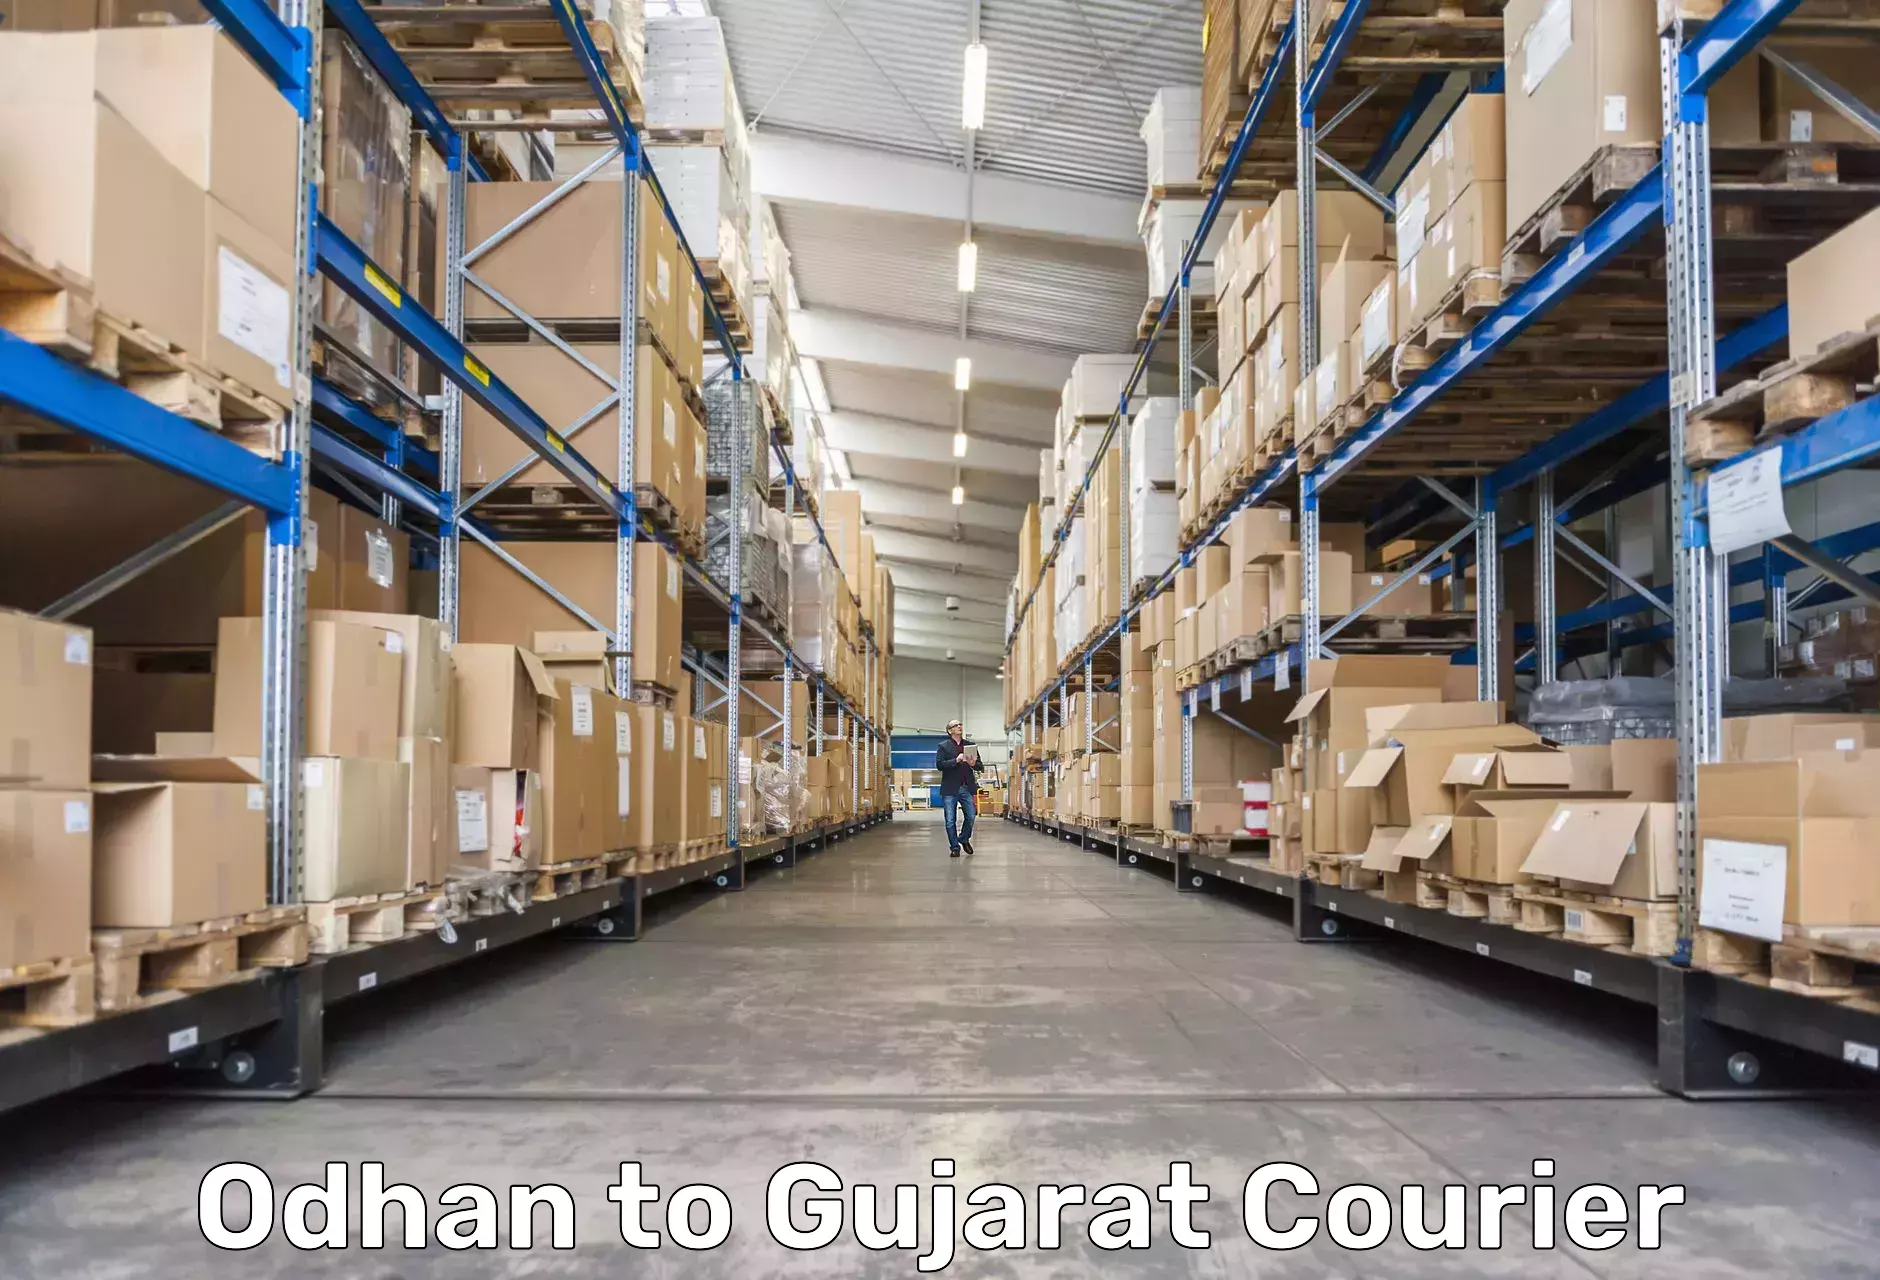 Courier service innovation in Odhan to Vyara